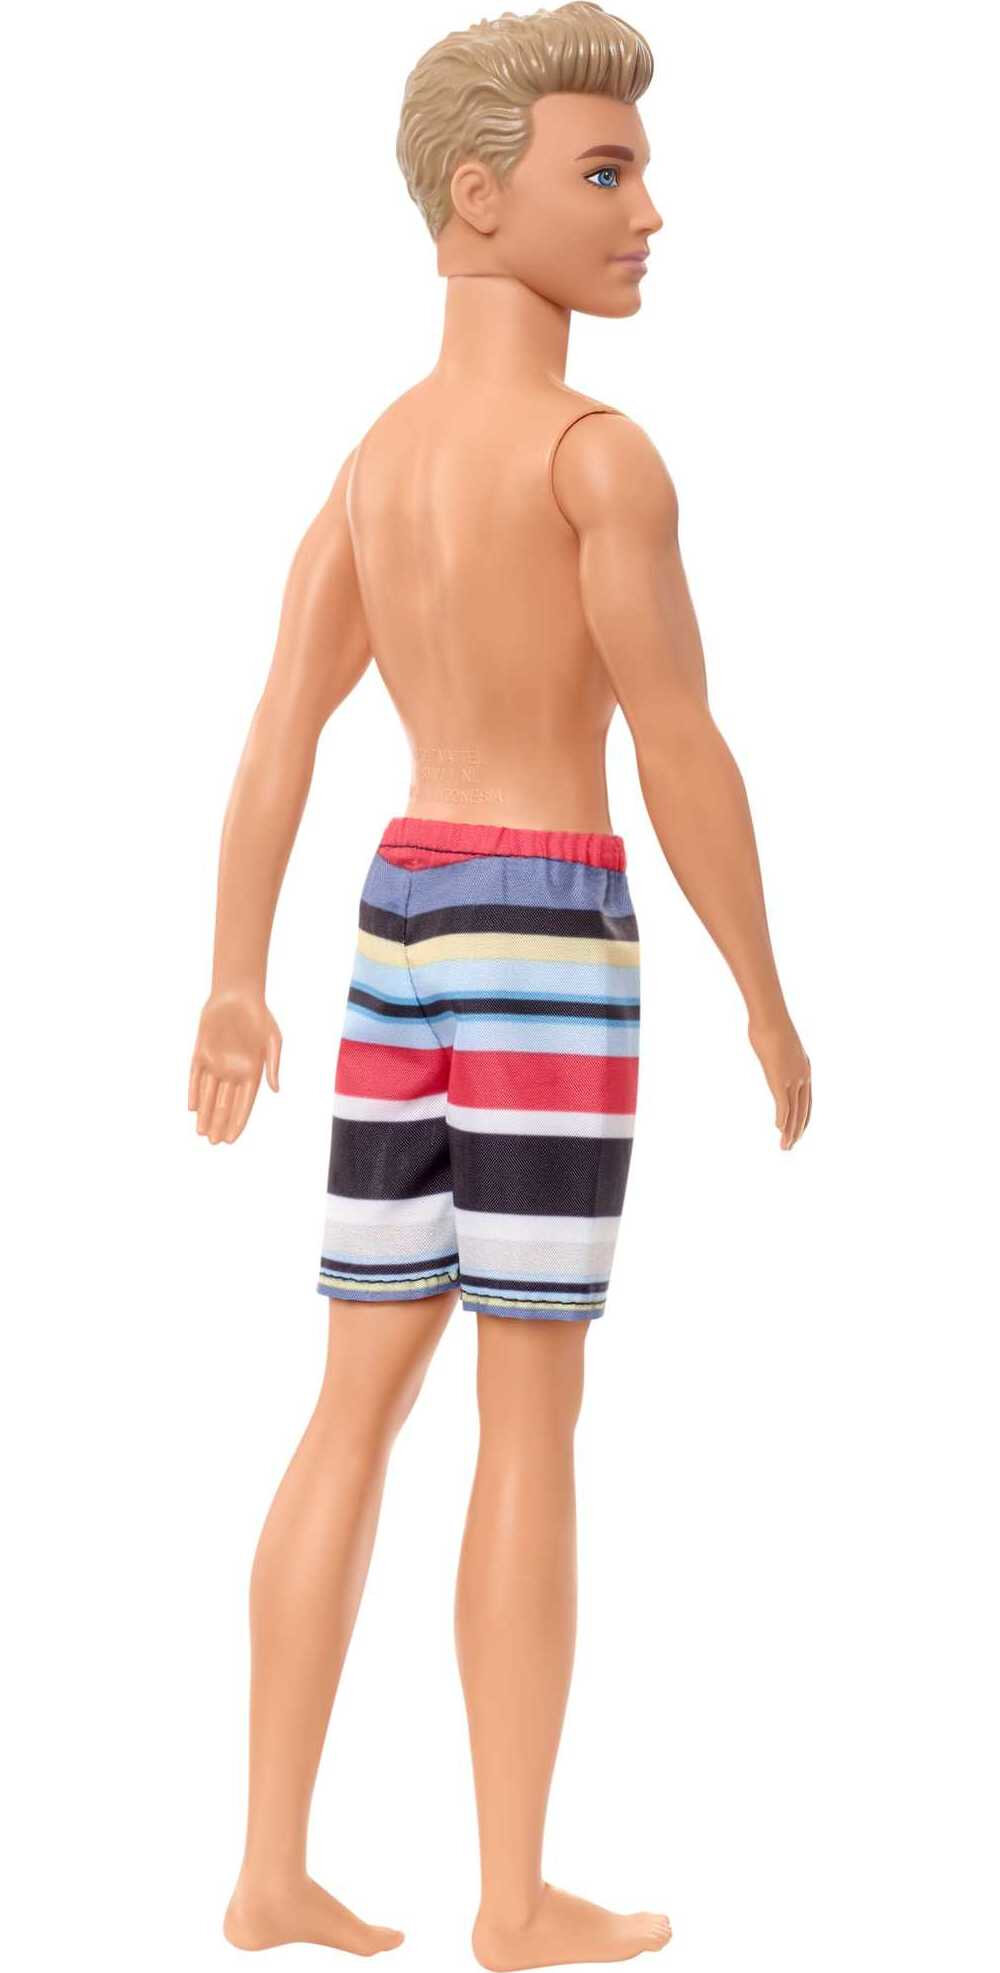 Barbie Ken Beach Doll with Blonde Hair & Striped Swimsuit - image 3 of 5